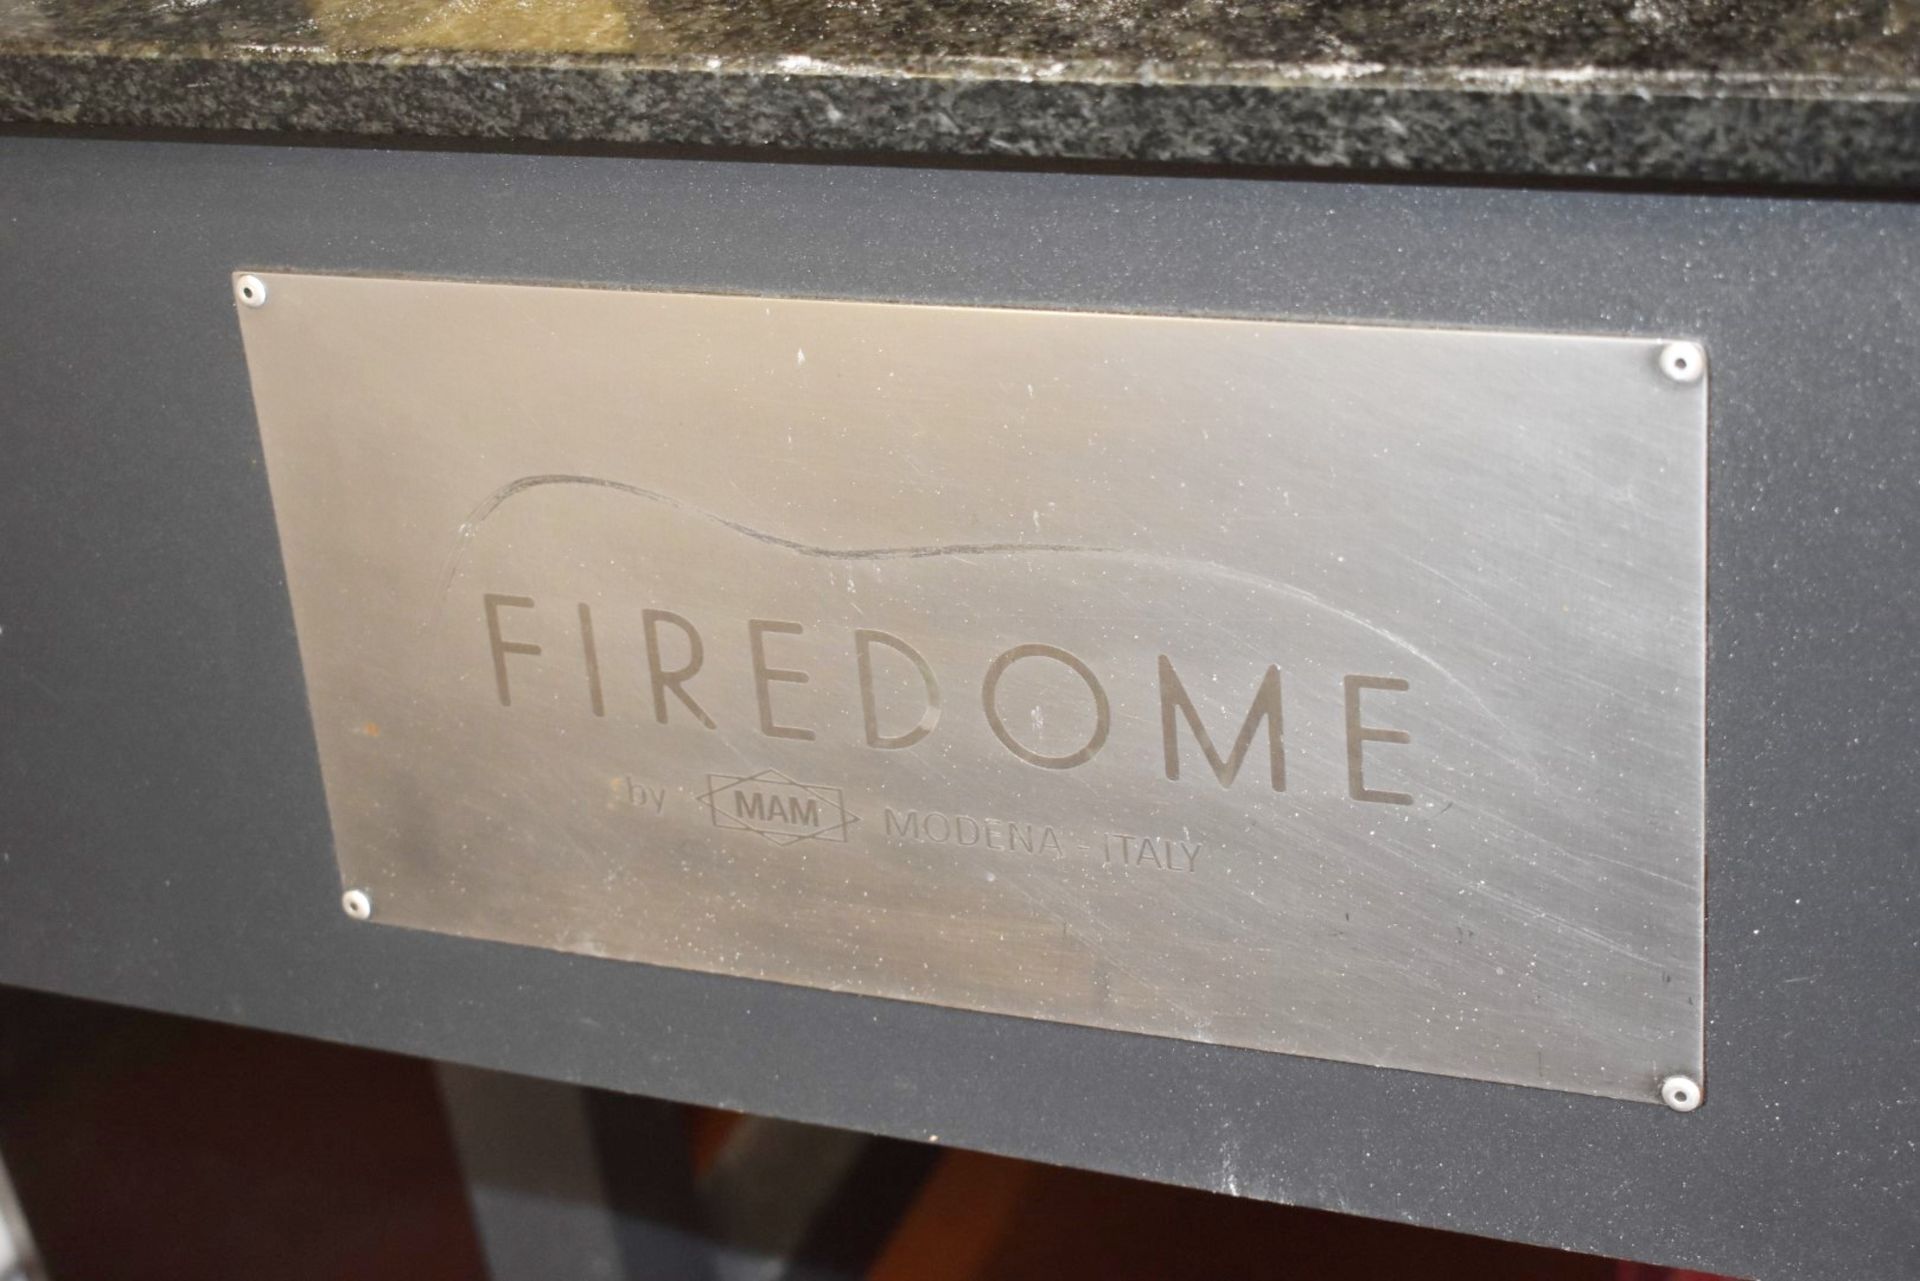 1 x MAM Firedome Commercial Stone Baked Gas Pizza Oven - Made in Italy - Type Modular Fire E - CL499 - Image 5 of 10